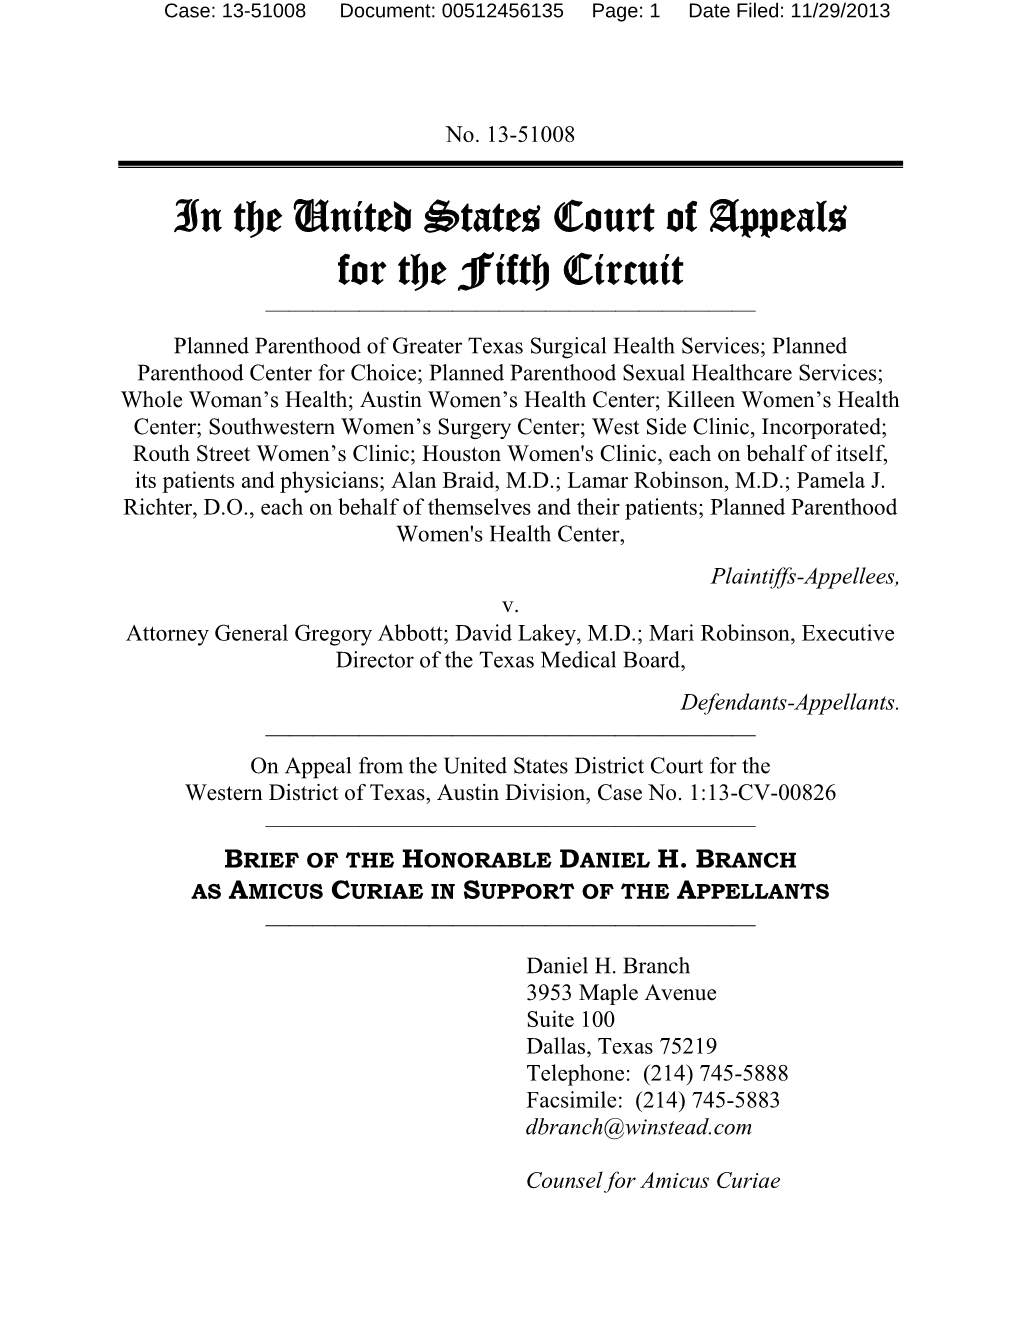 BRIEF of the HONORABLE DANIEL H. BRANCH AS AMICUS CURIAE in SUPPORT of the APPELLANTS ————————————————————— Daniel H